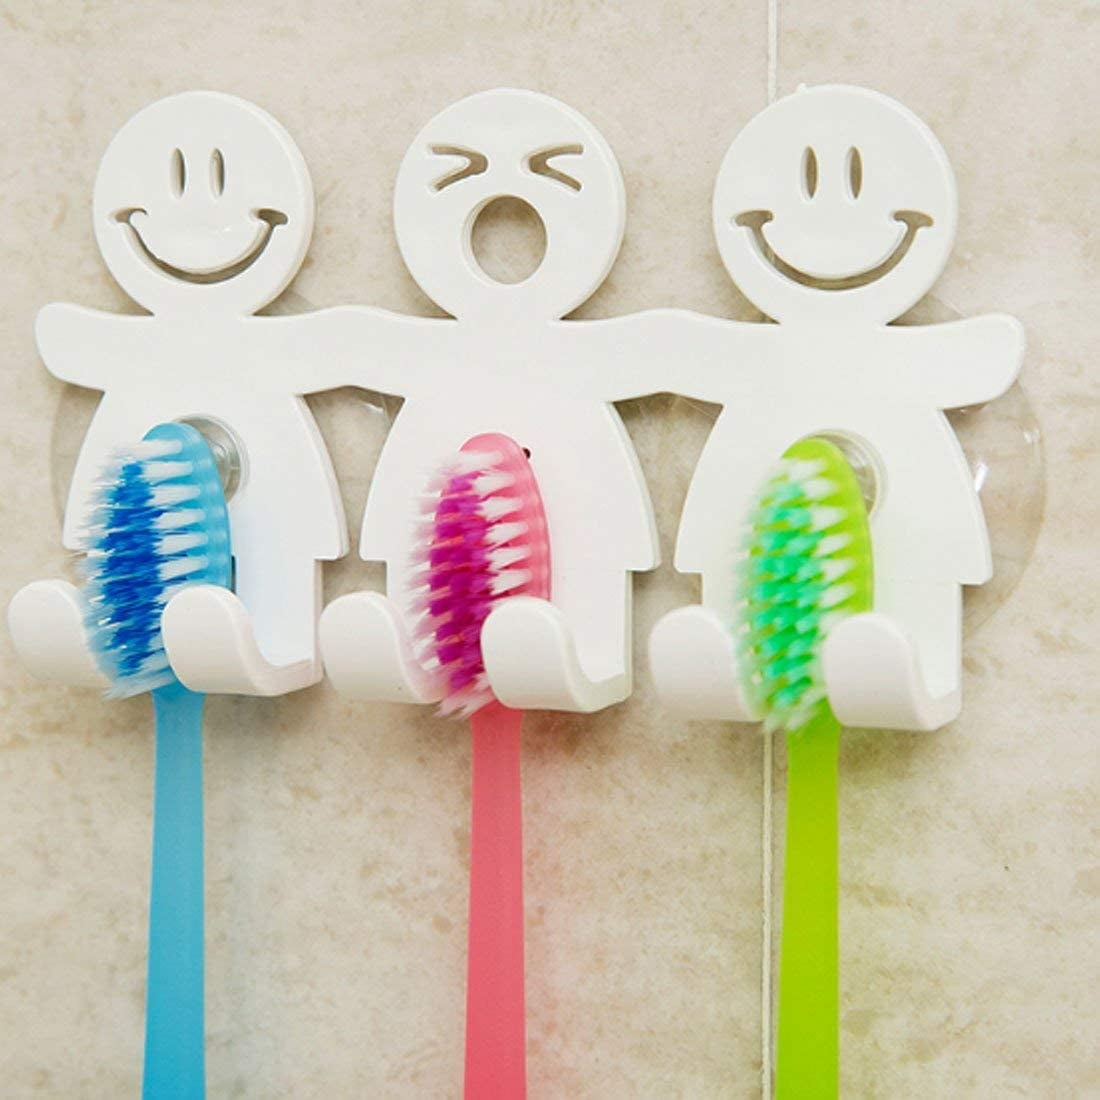 New Home Portable Smile Face Suction Cup Toothbrush Cover Grip Wall Rack Holder 